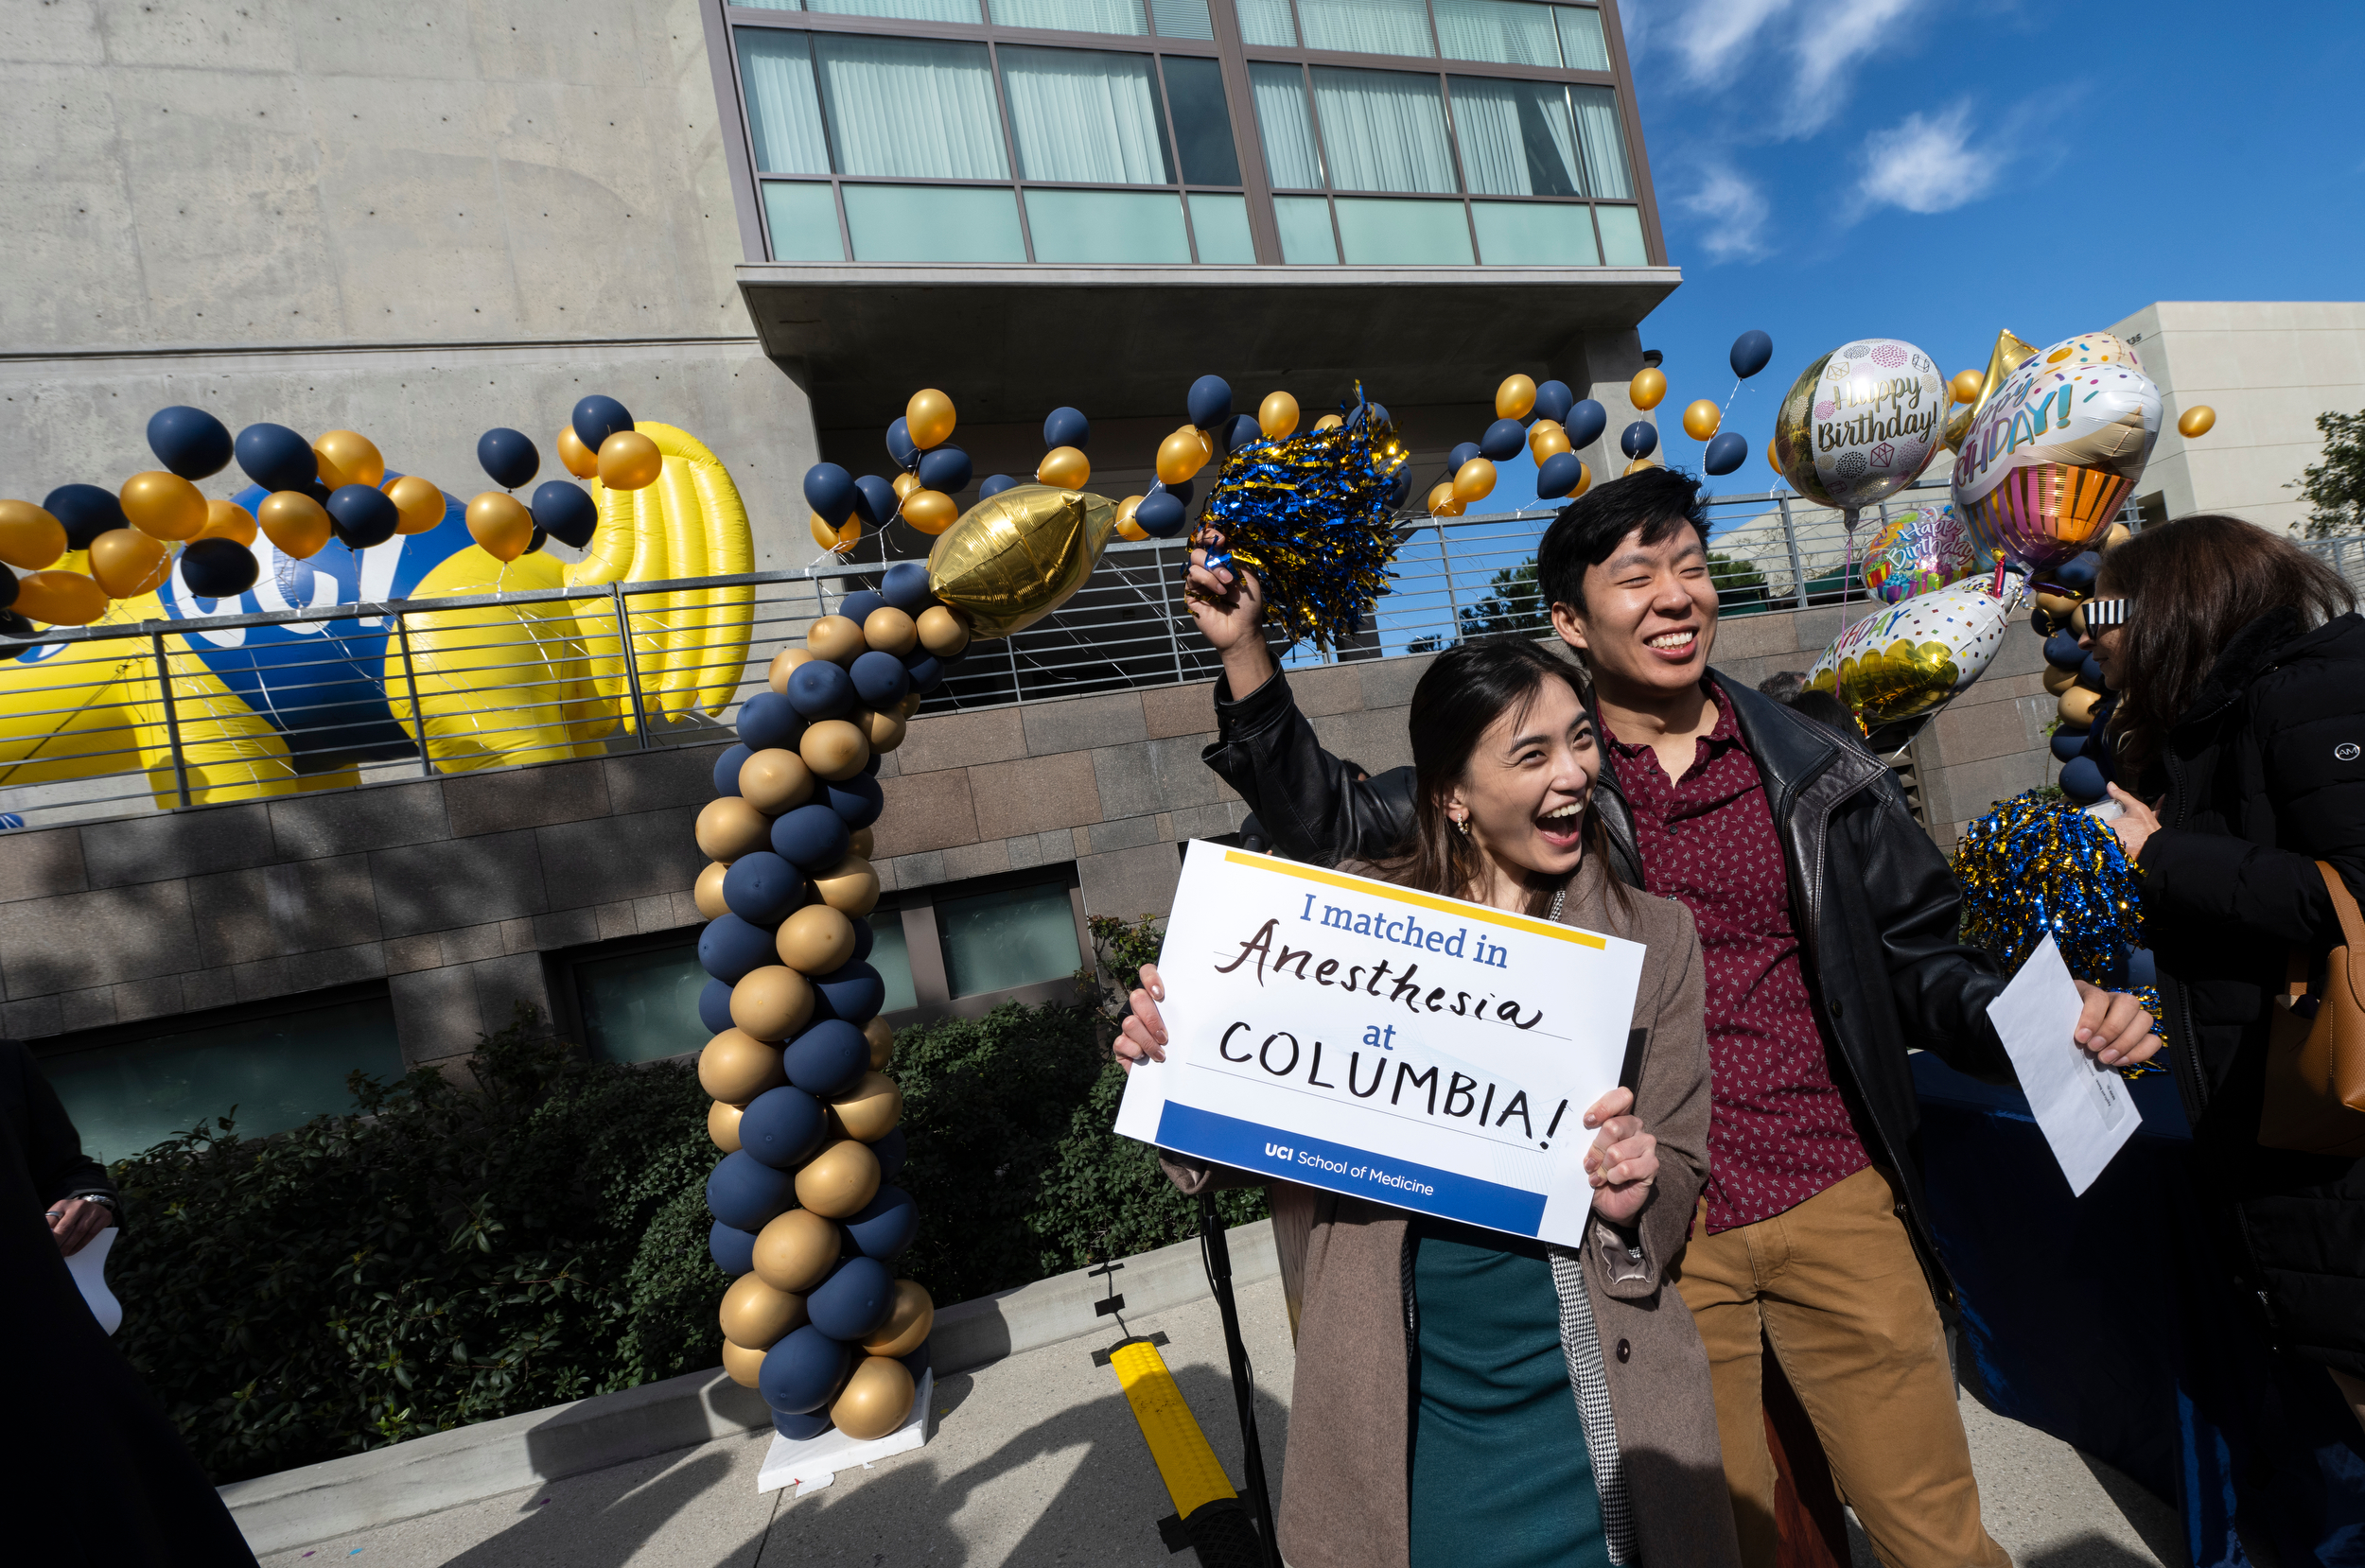 Graduating UCI medical student Melissa Chang and boyfriend David Zheng celebrate after the event.